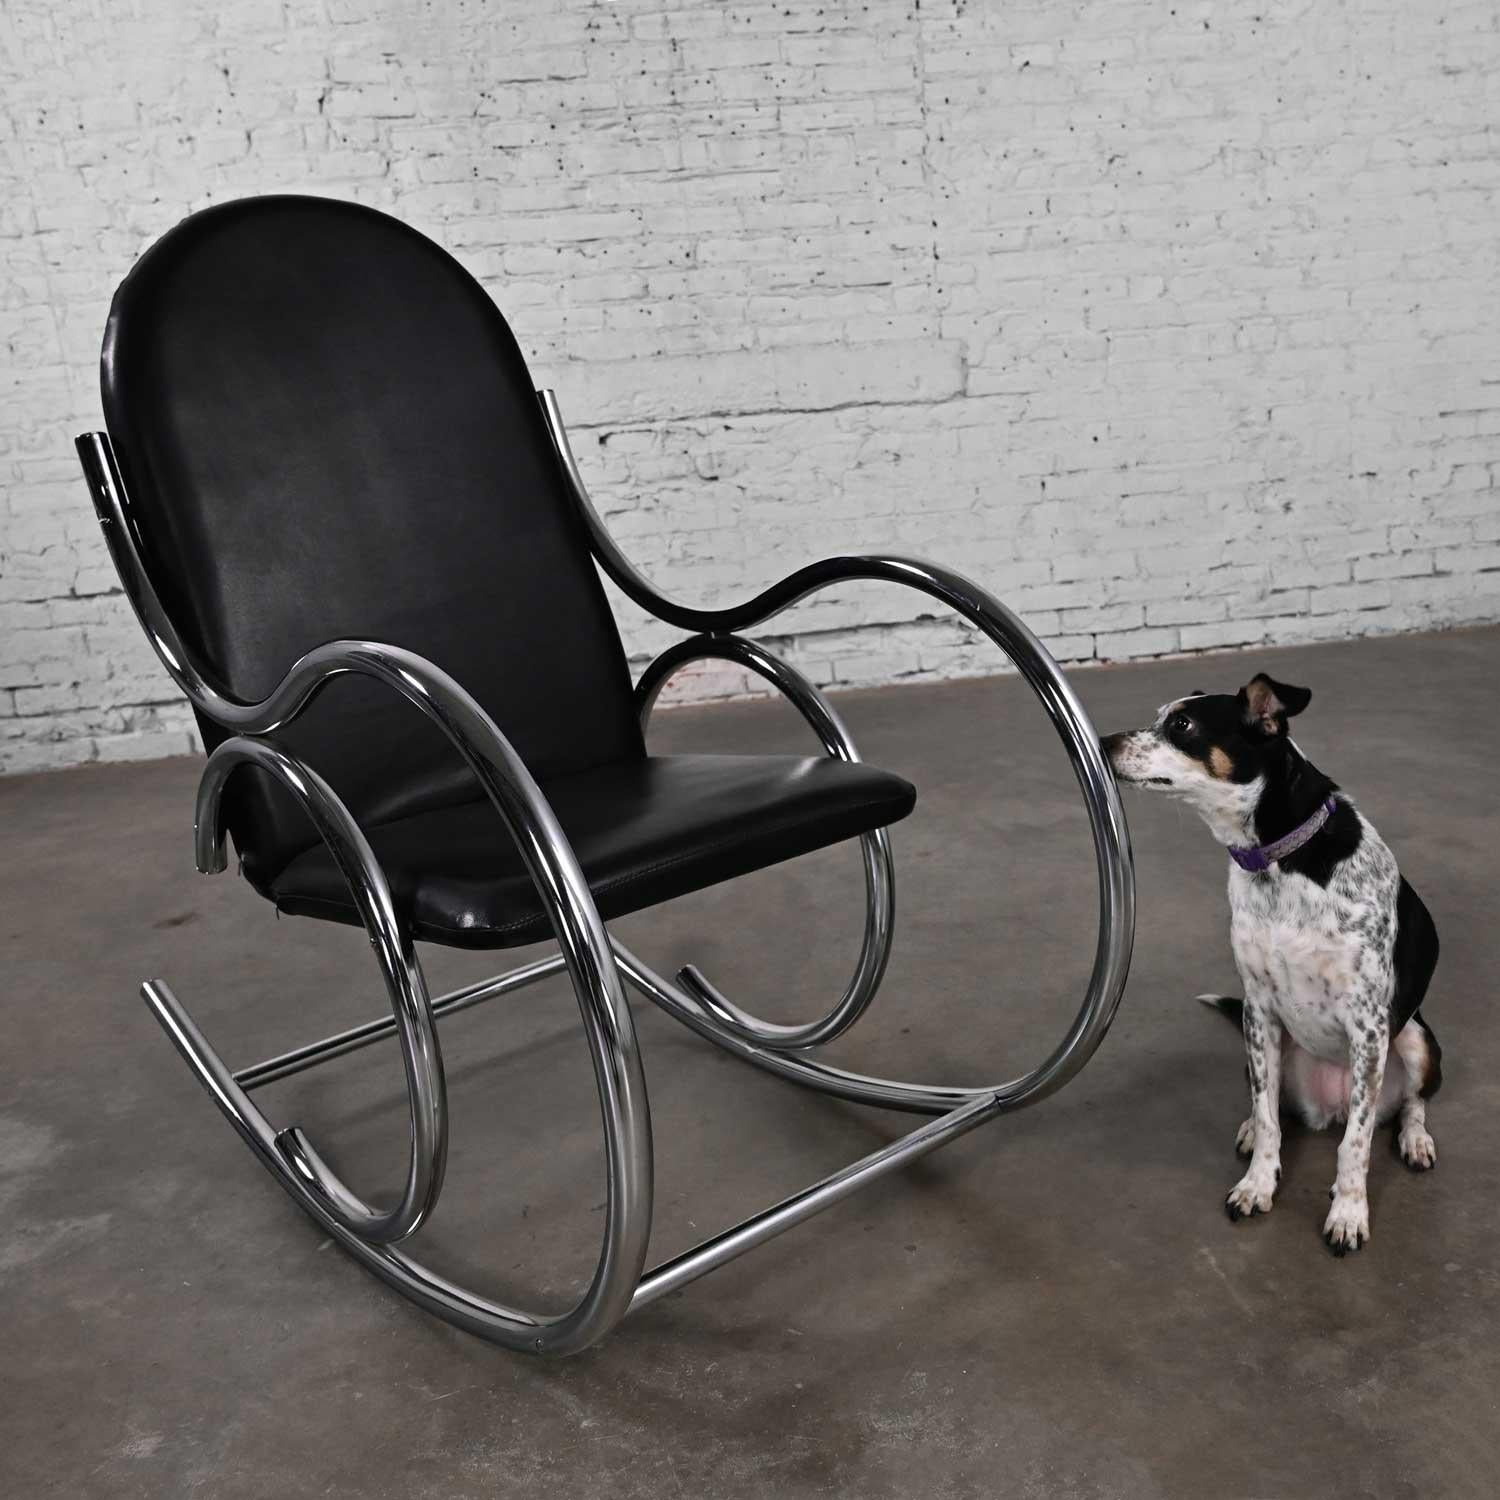 Bauhaus Style Black Vinyl & Chrome Bentwood Style Rocking Chair After Thonet For Sale 5